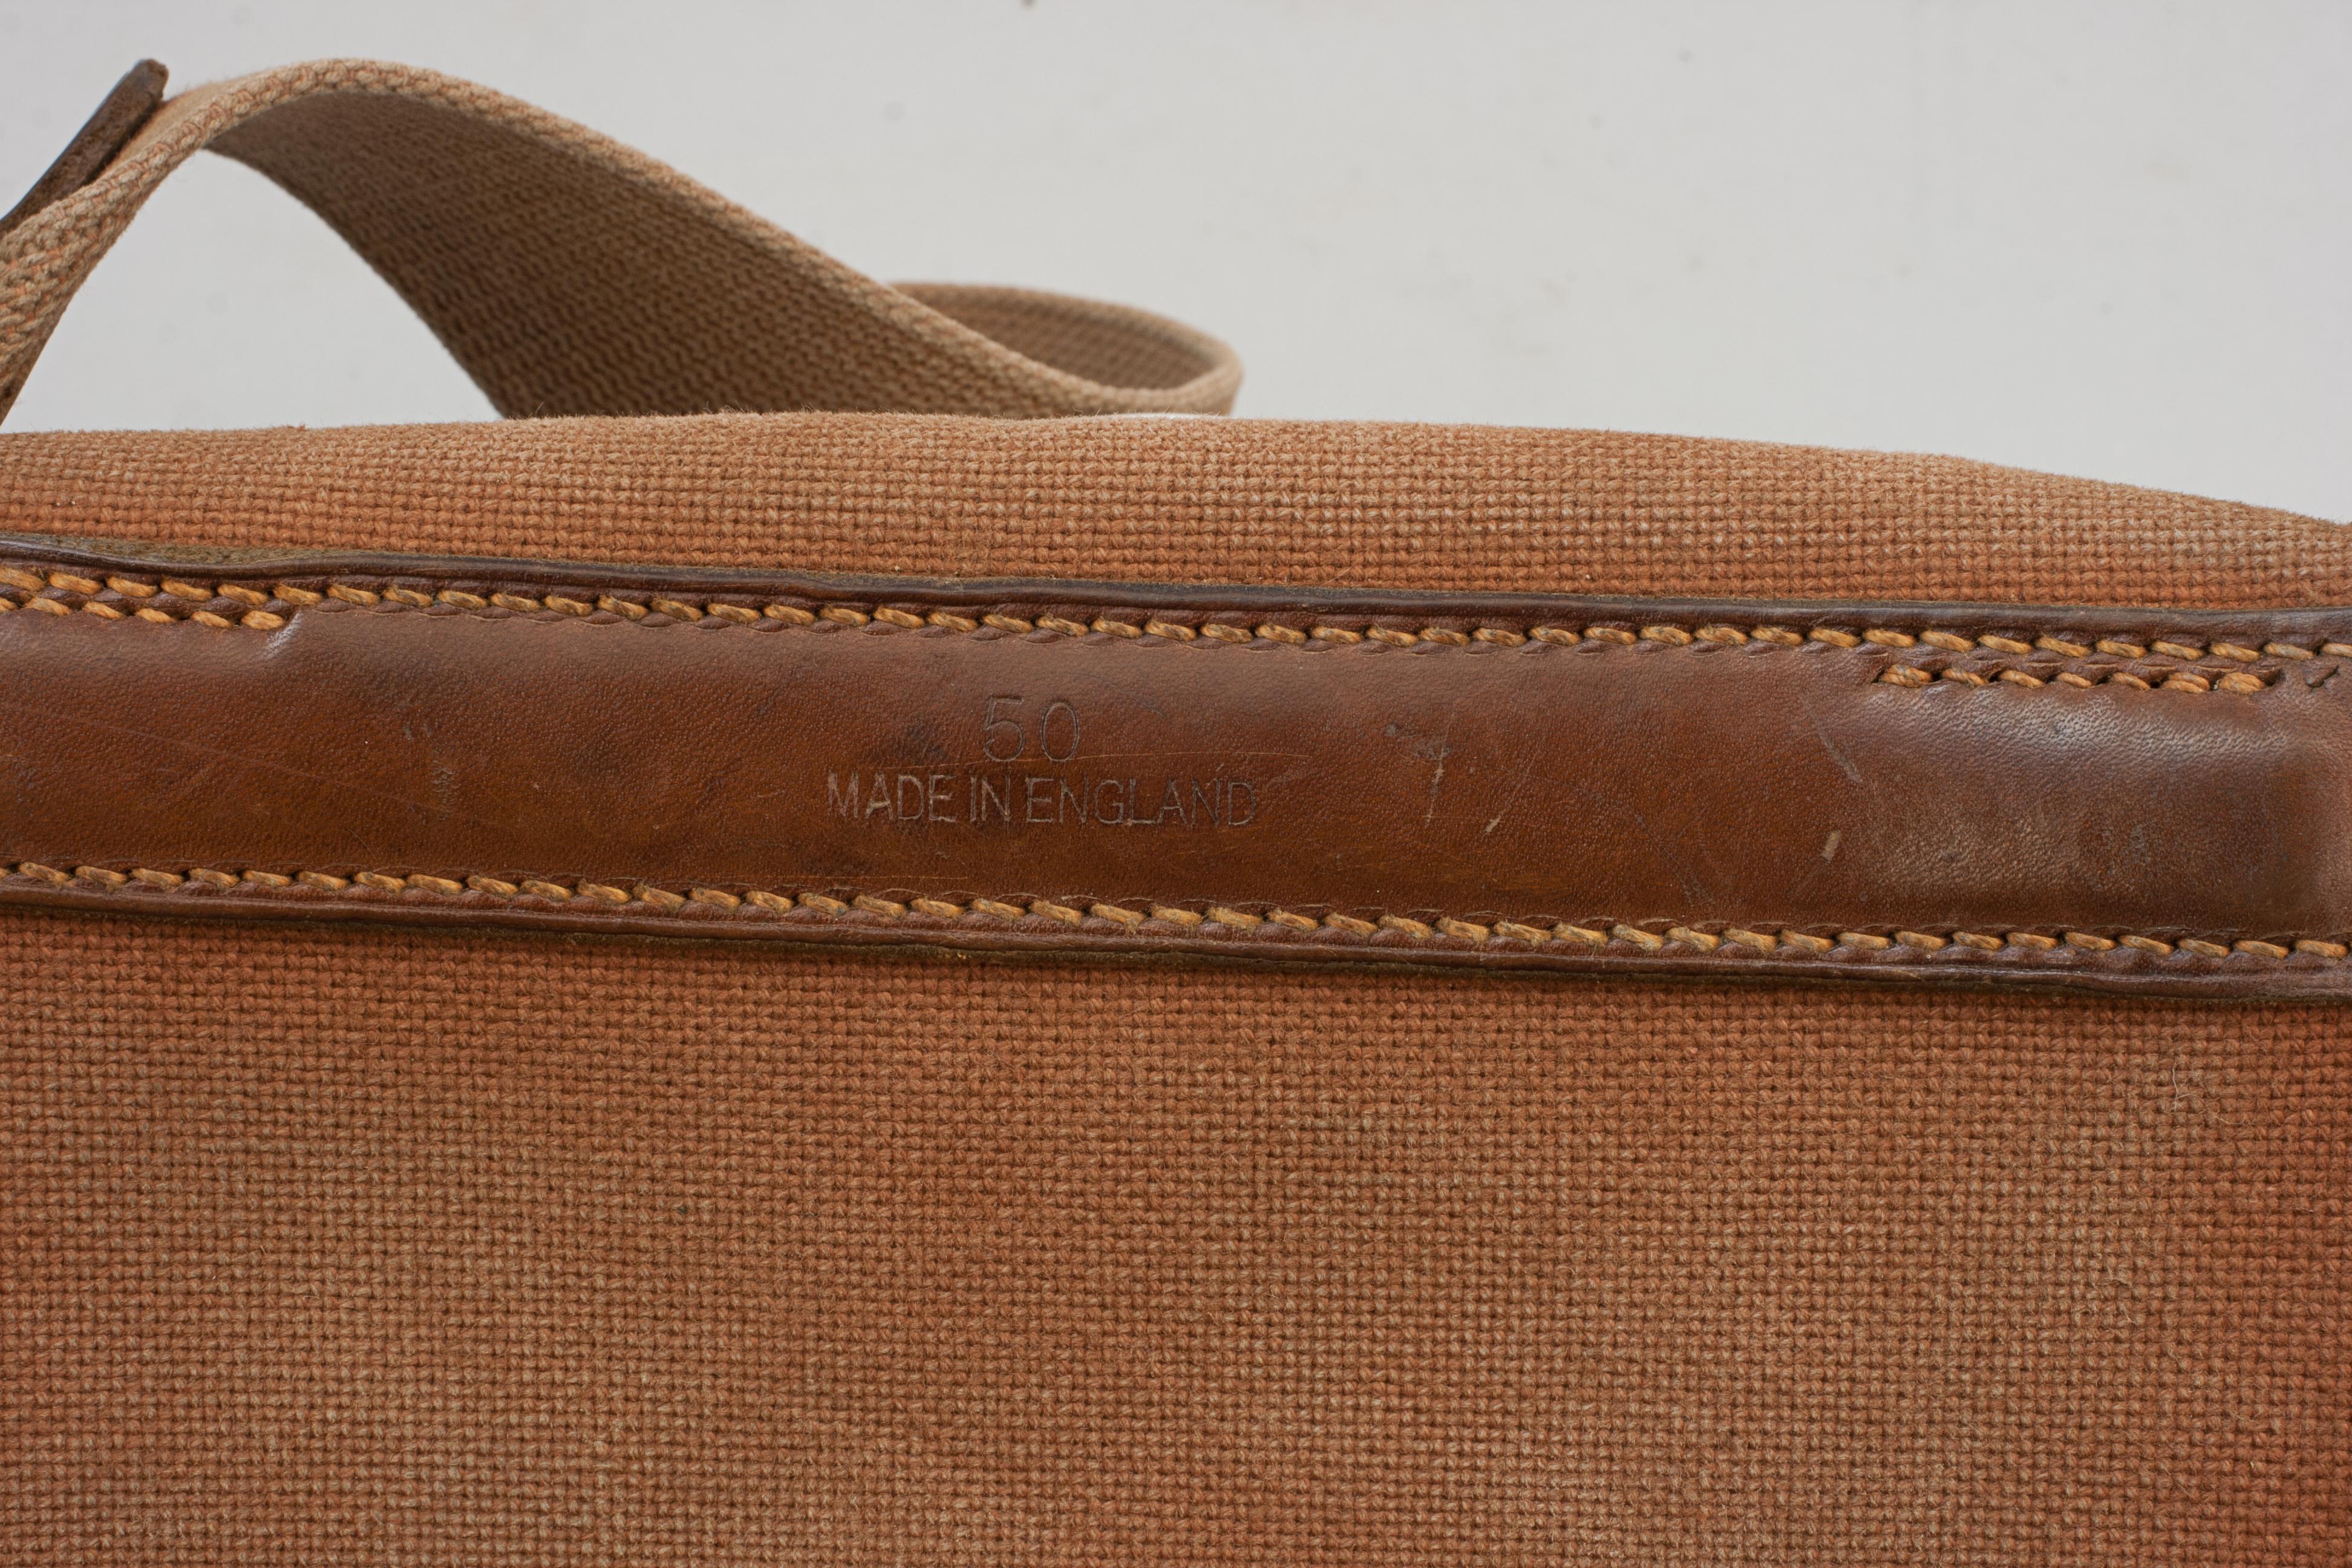 Vintage Canvas Brady Cartridge Bag In Good Condition For Sale In Oxfordshire, GB